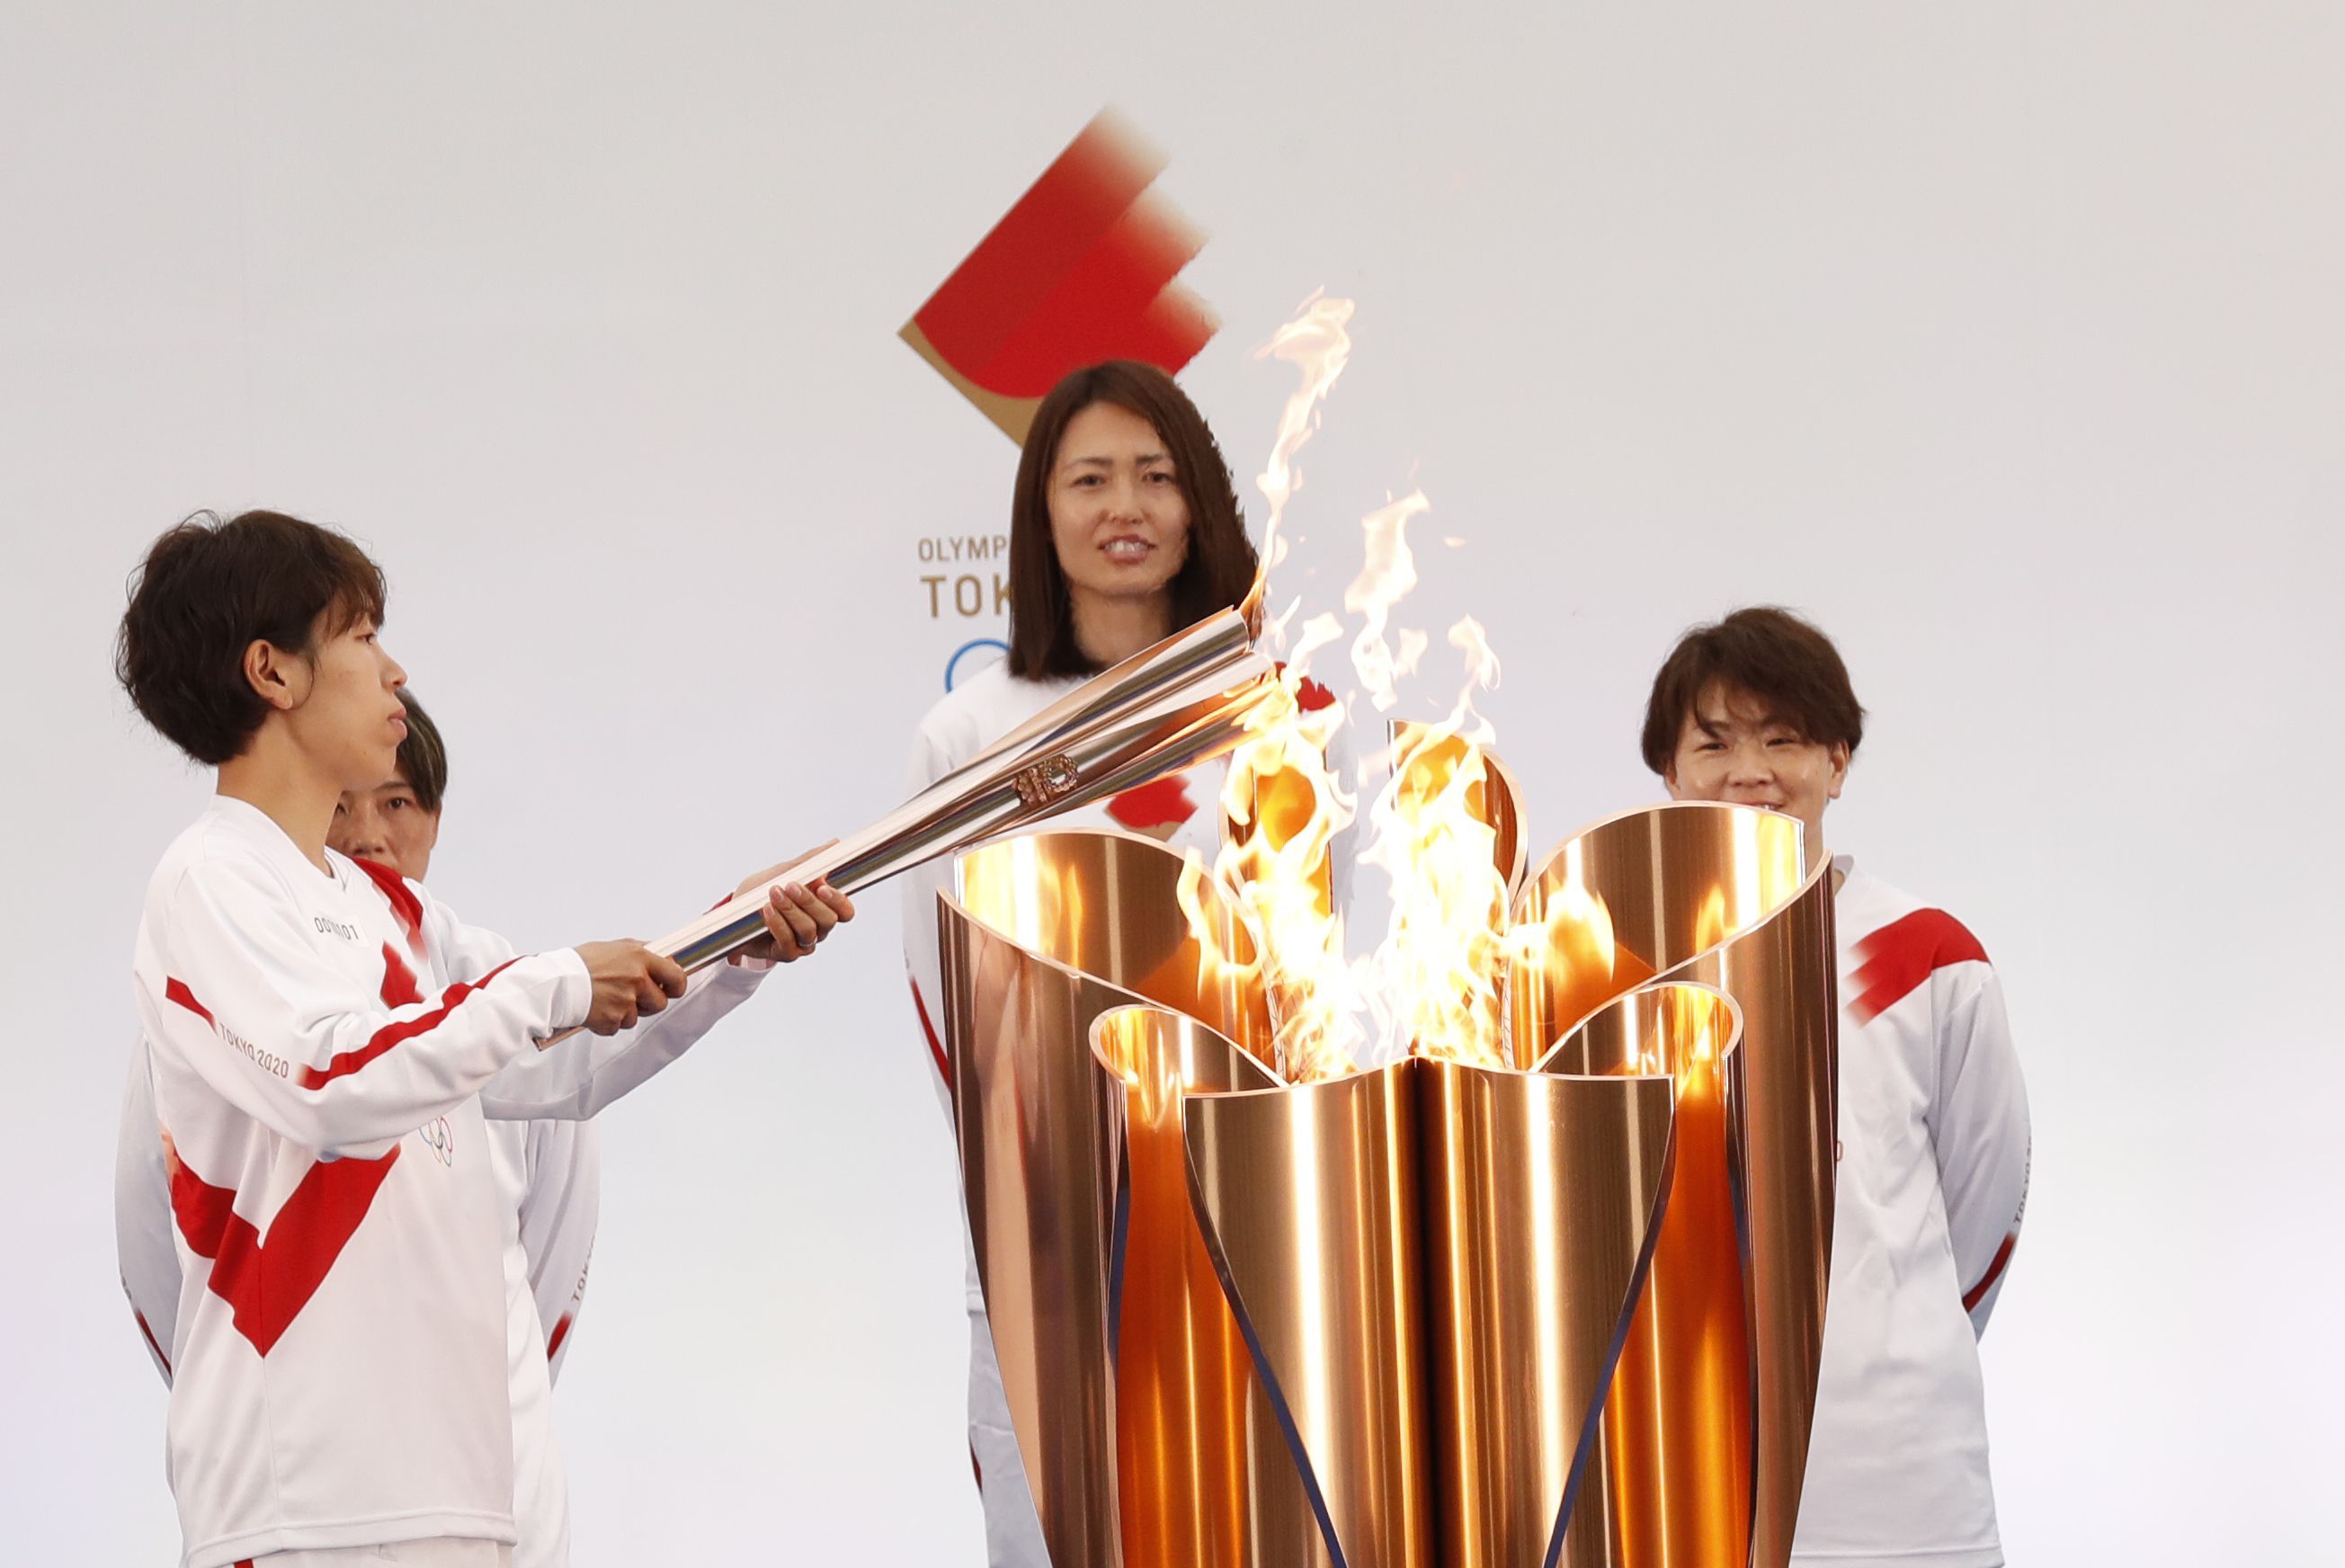  Azusa Iwashimizu (L), member of Japan women's football national team, lights the torch from the celebration cauldron during the Tokyo 2020 Olympic Torch Relay Grand Start at the J Village on March 25